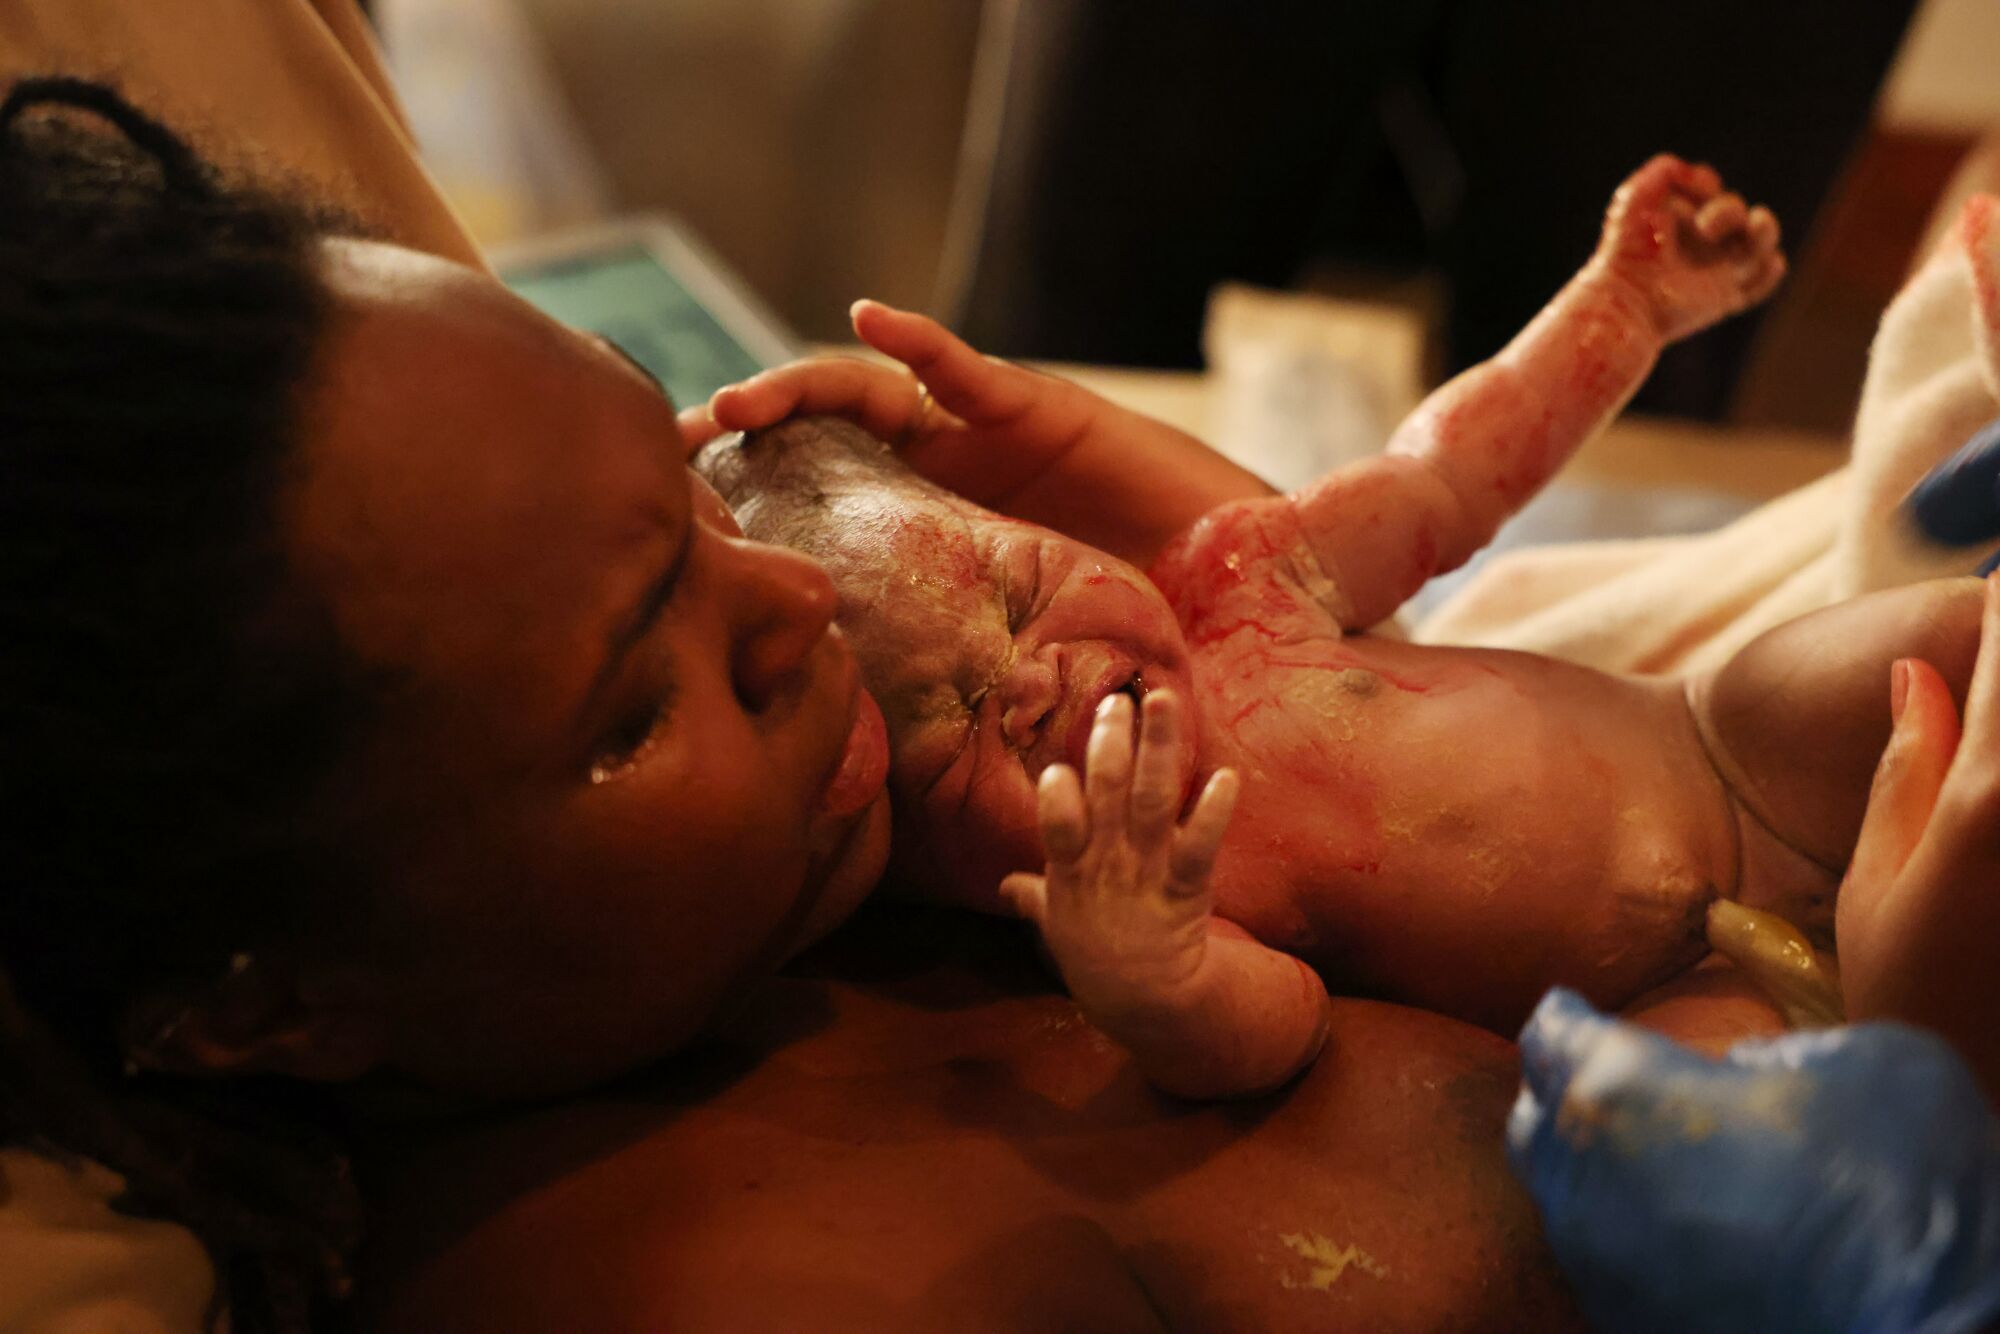 A woman holds her baby moments after delivery